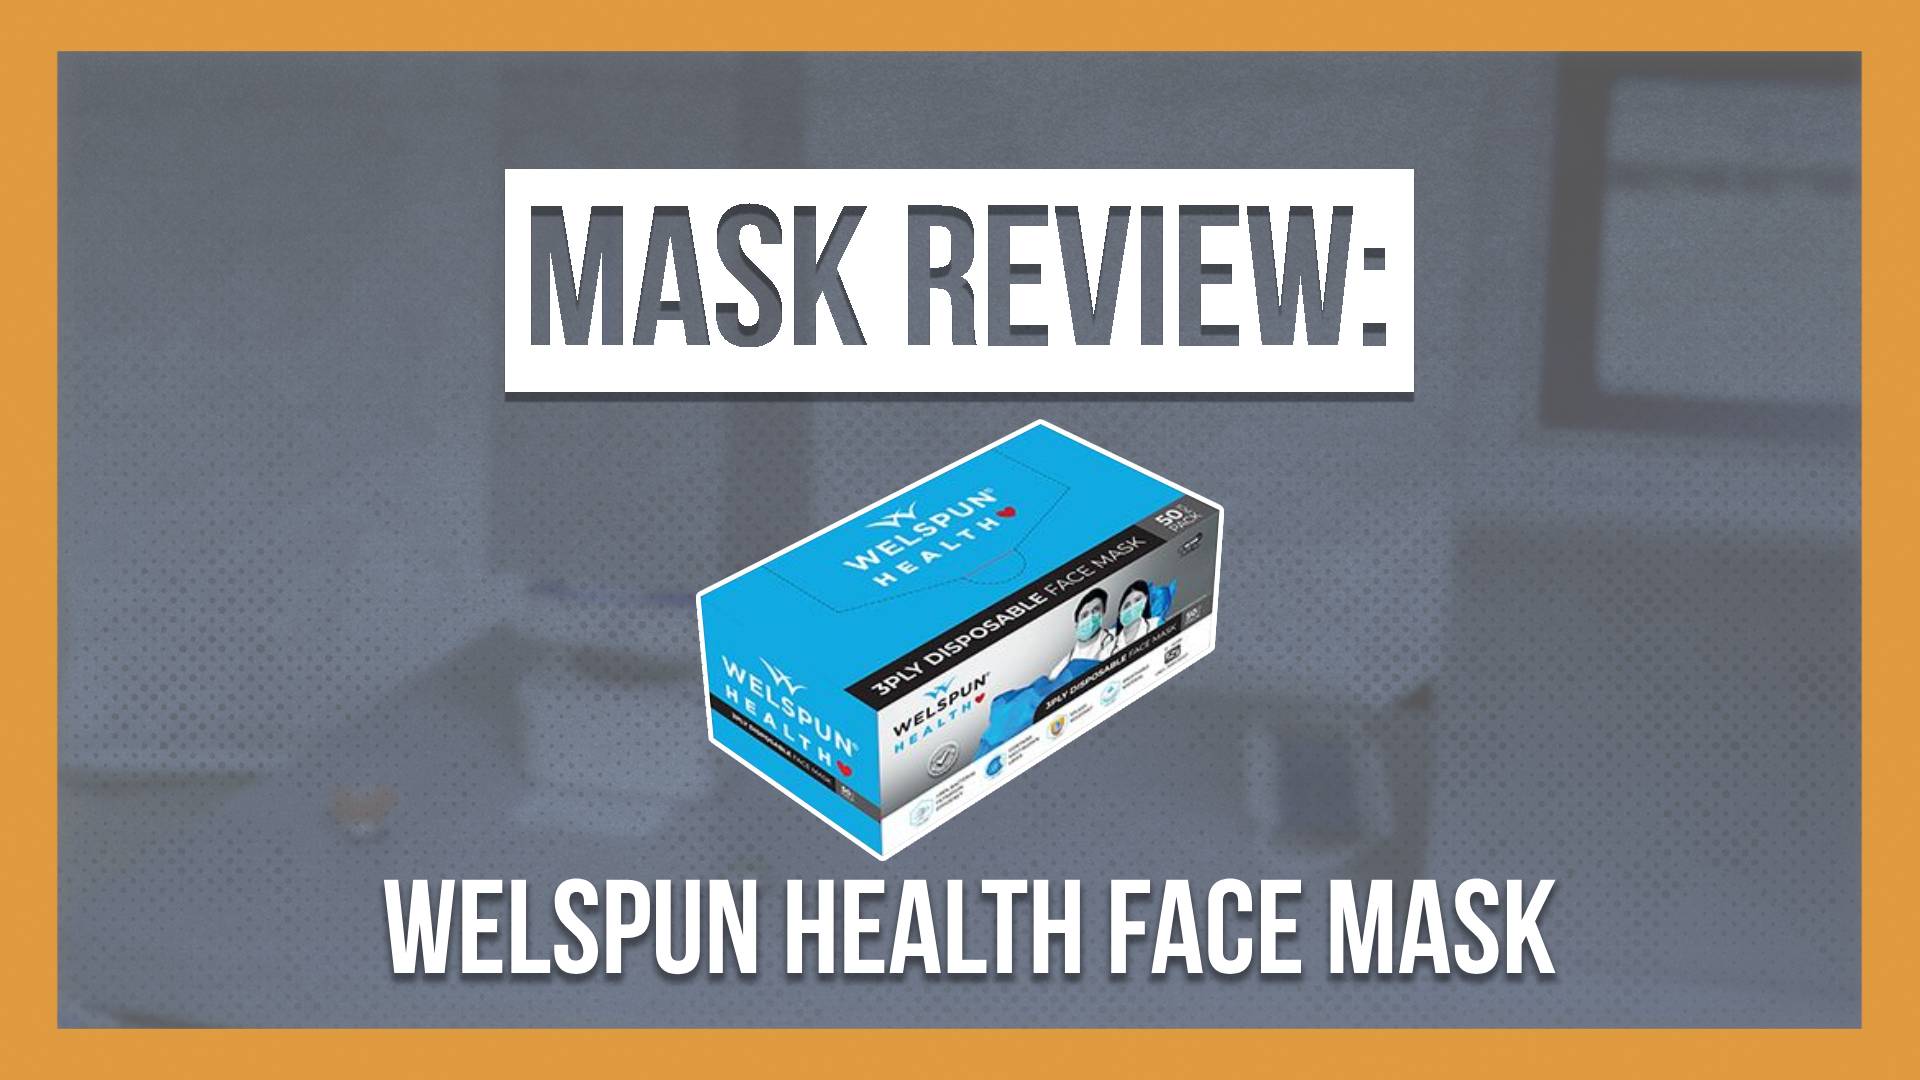 Welspun Health - 3 Ply Disposable Medical Mask